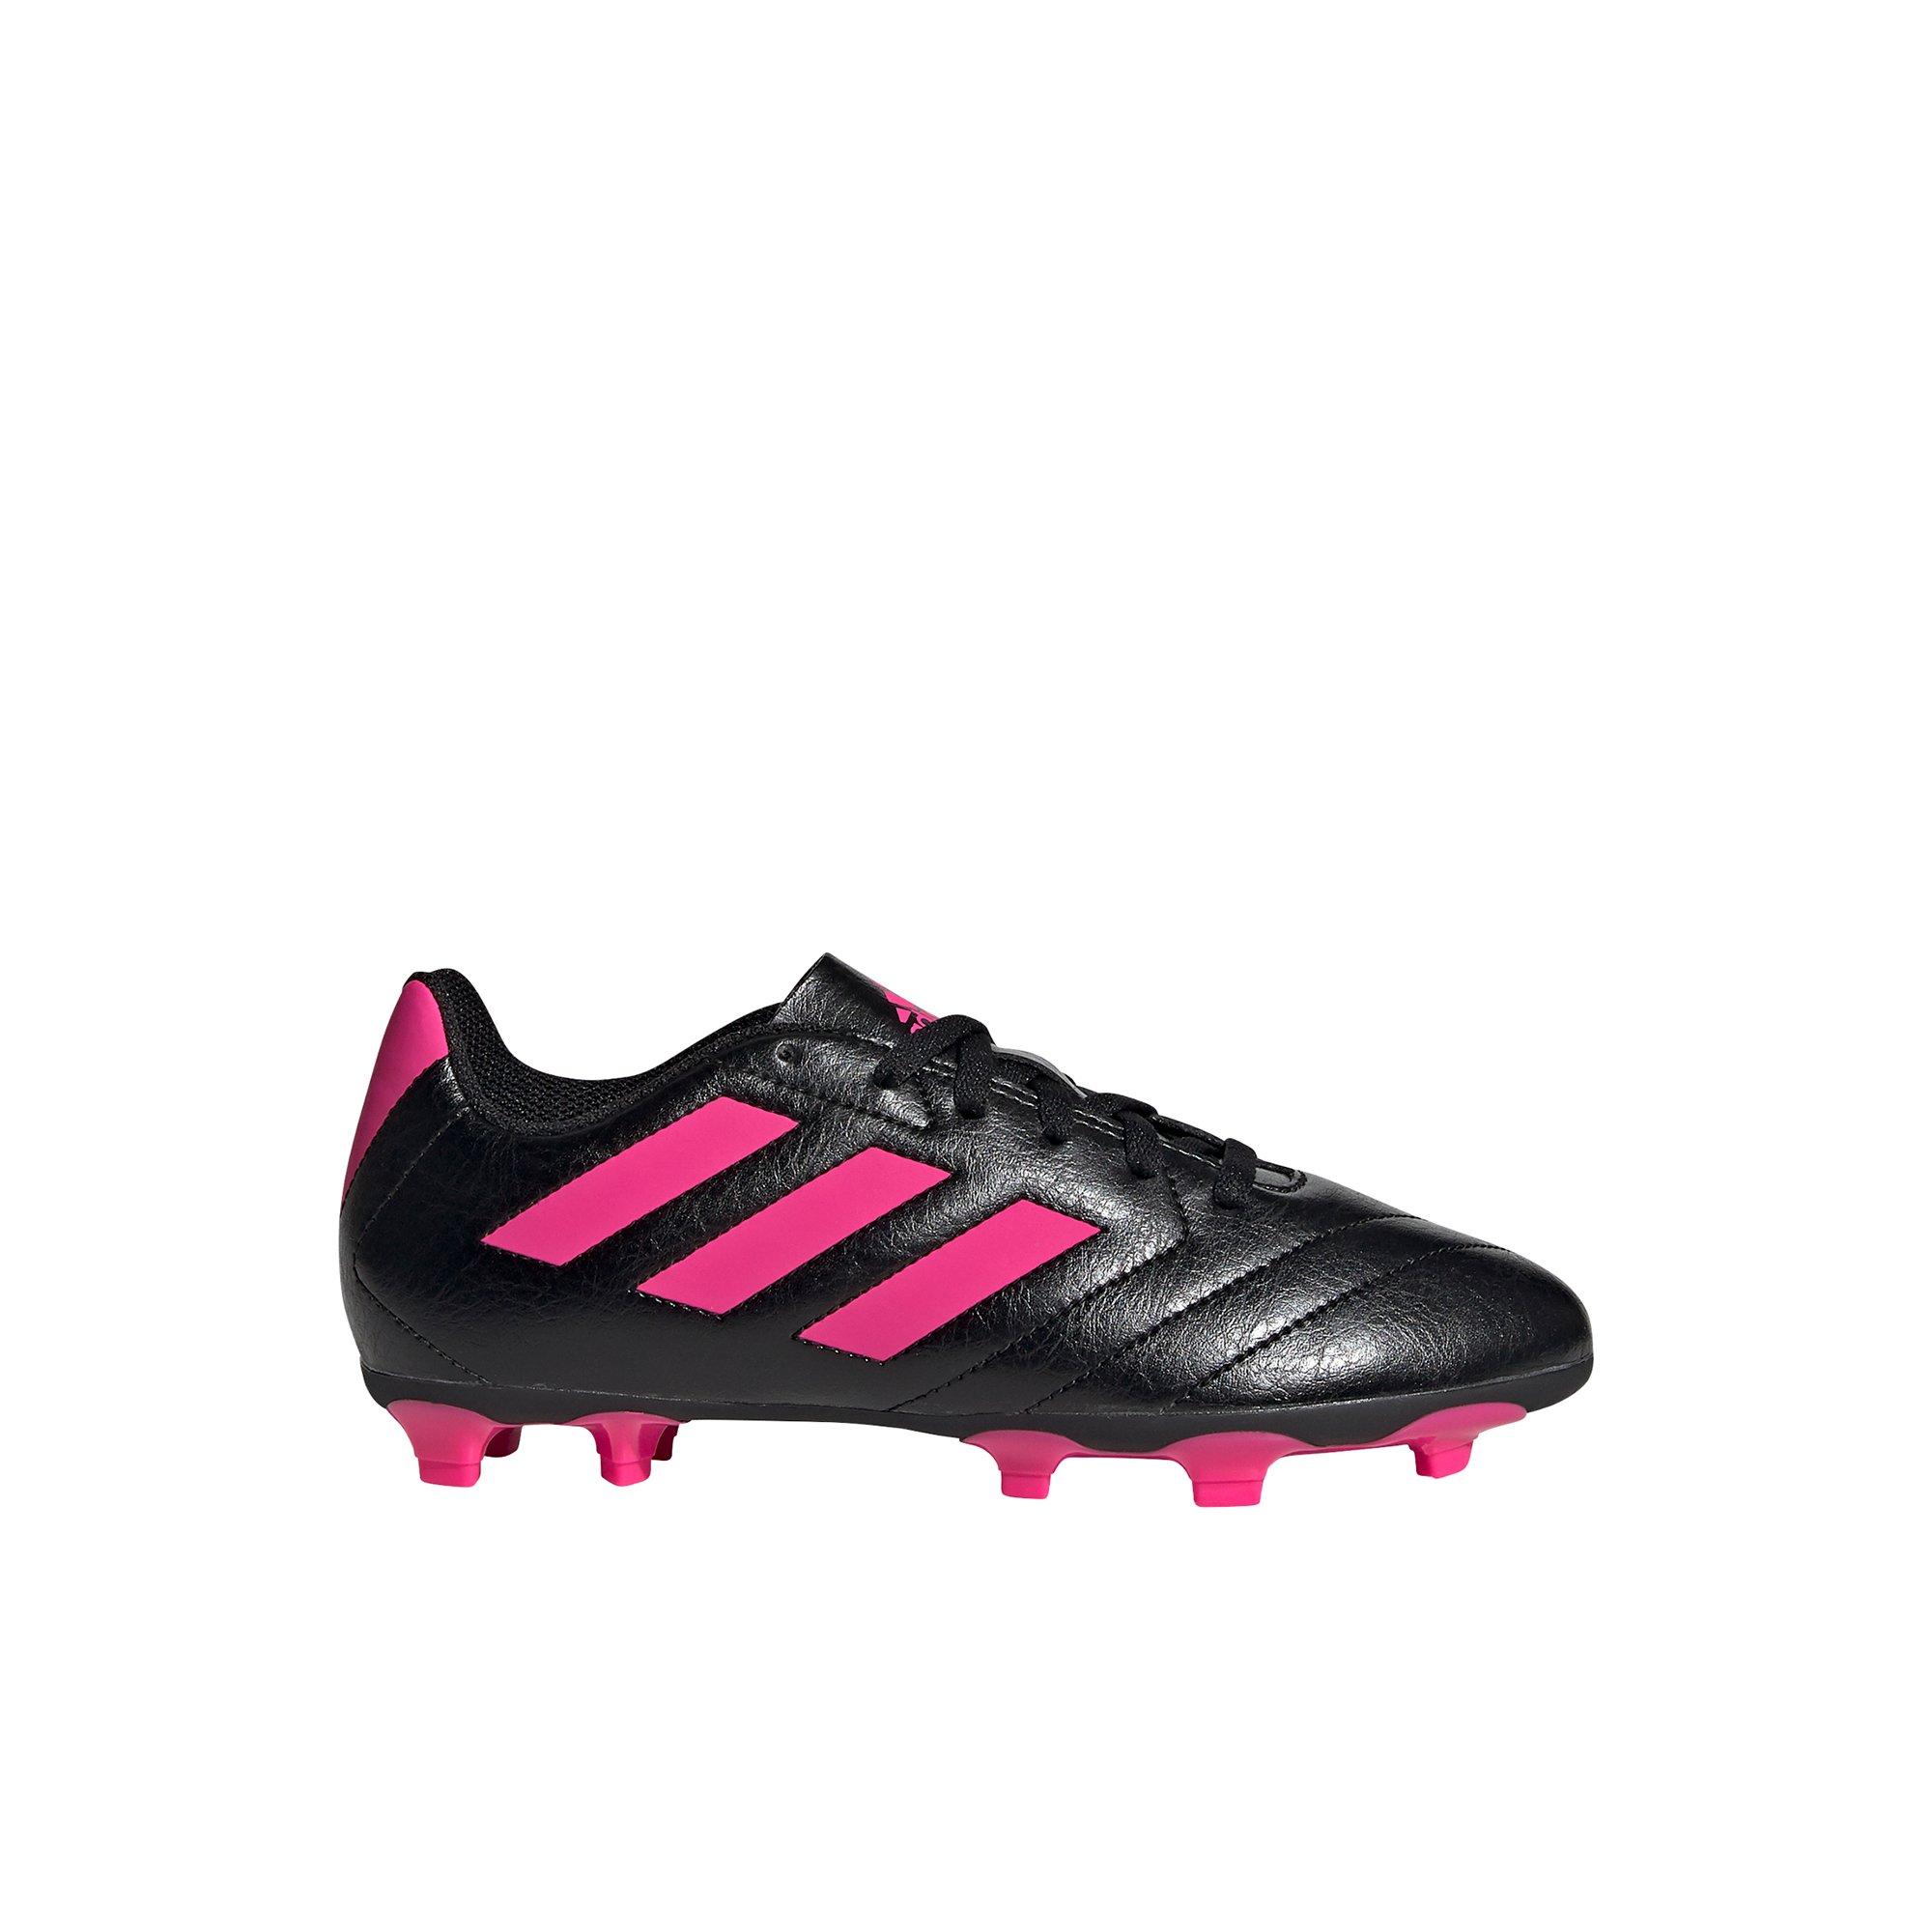 adidas soccer cleats pink